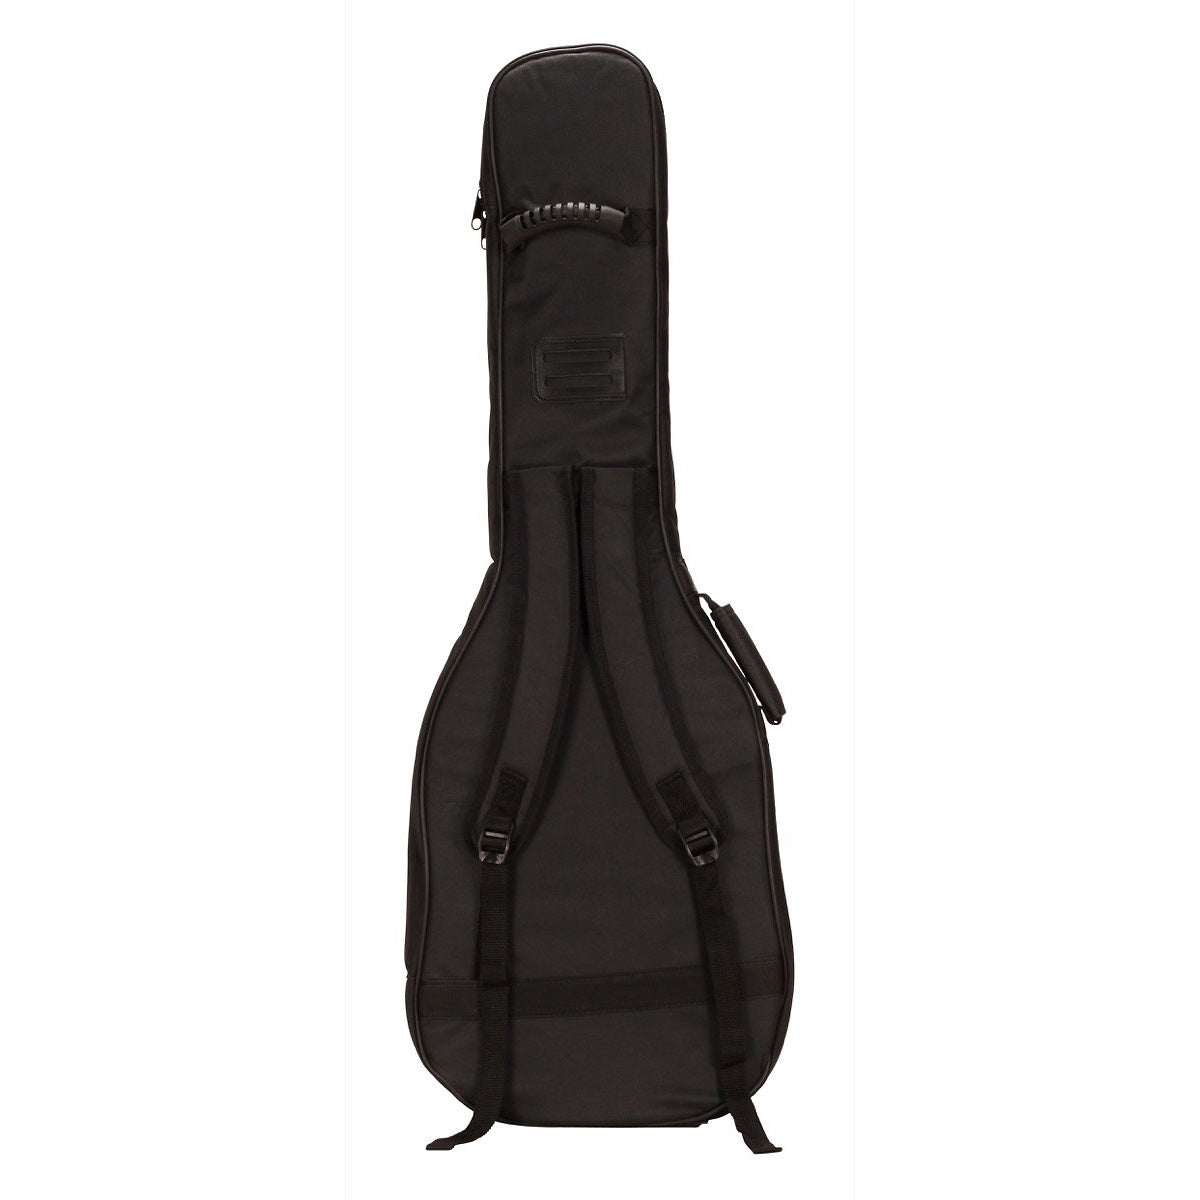 World Tour Deluxe 20mm Electric Guitar Gig Bag